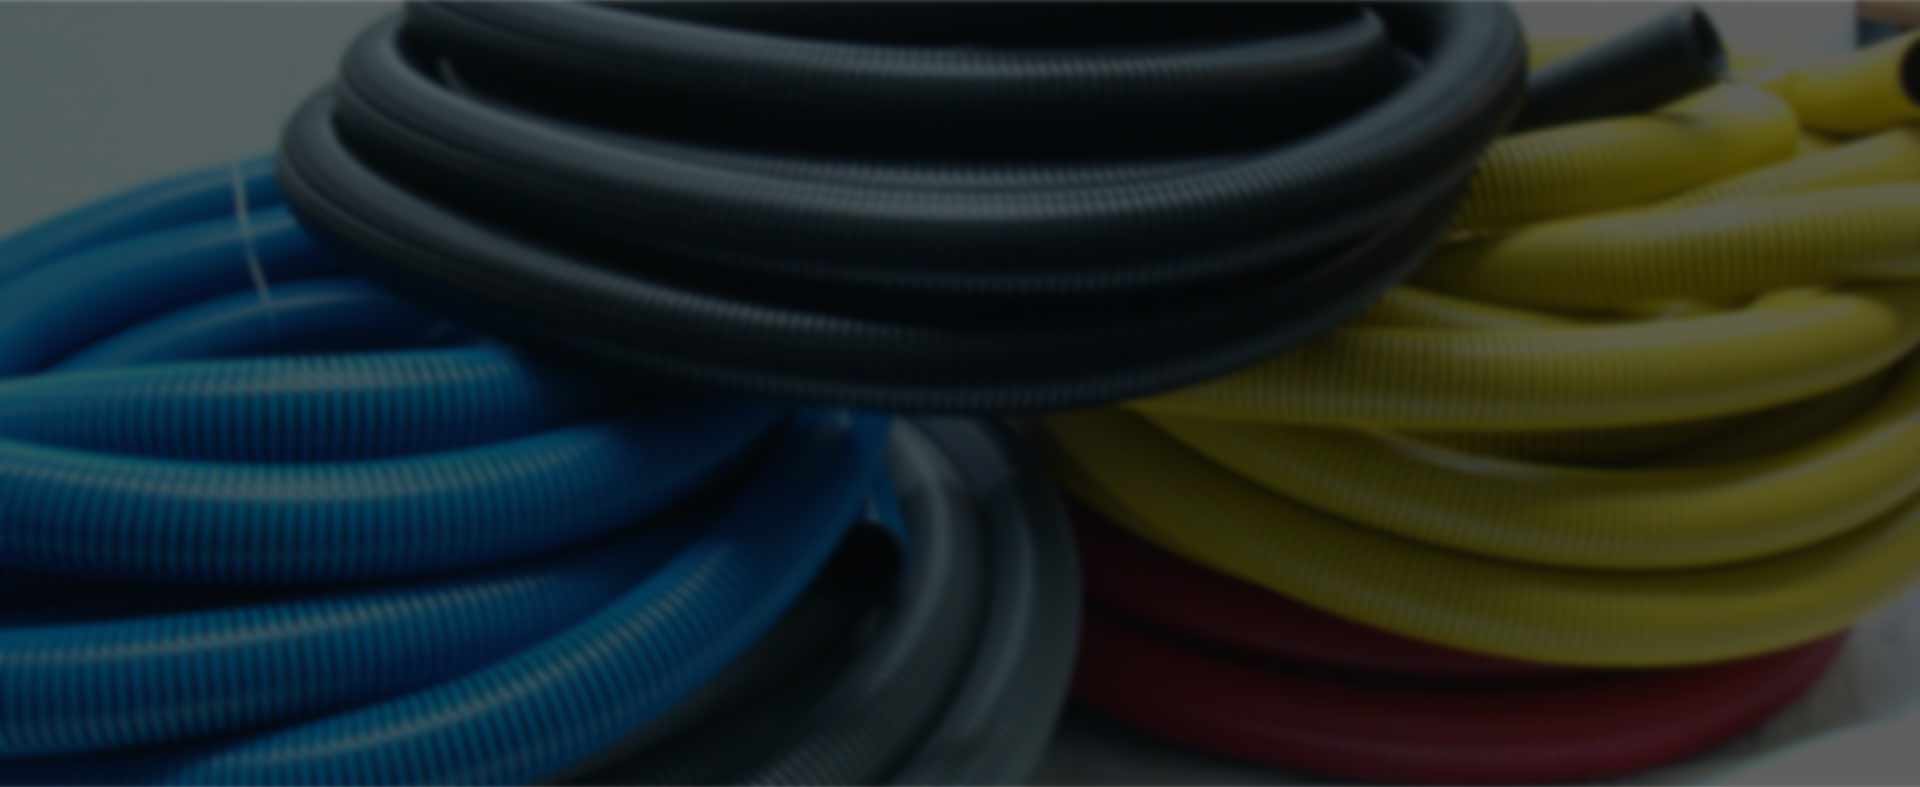 Why Choose Discharge Hose by Seapeak